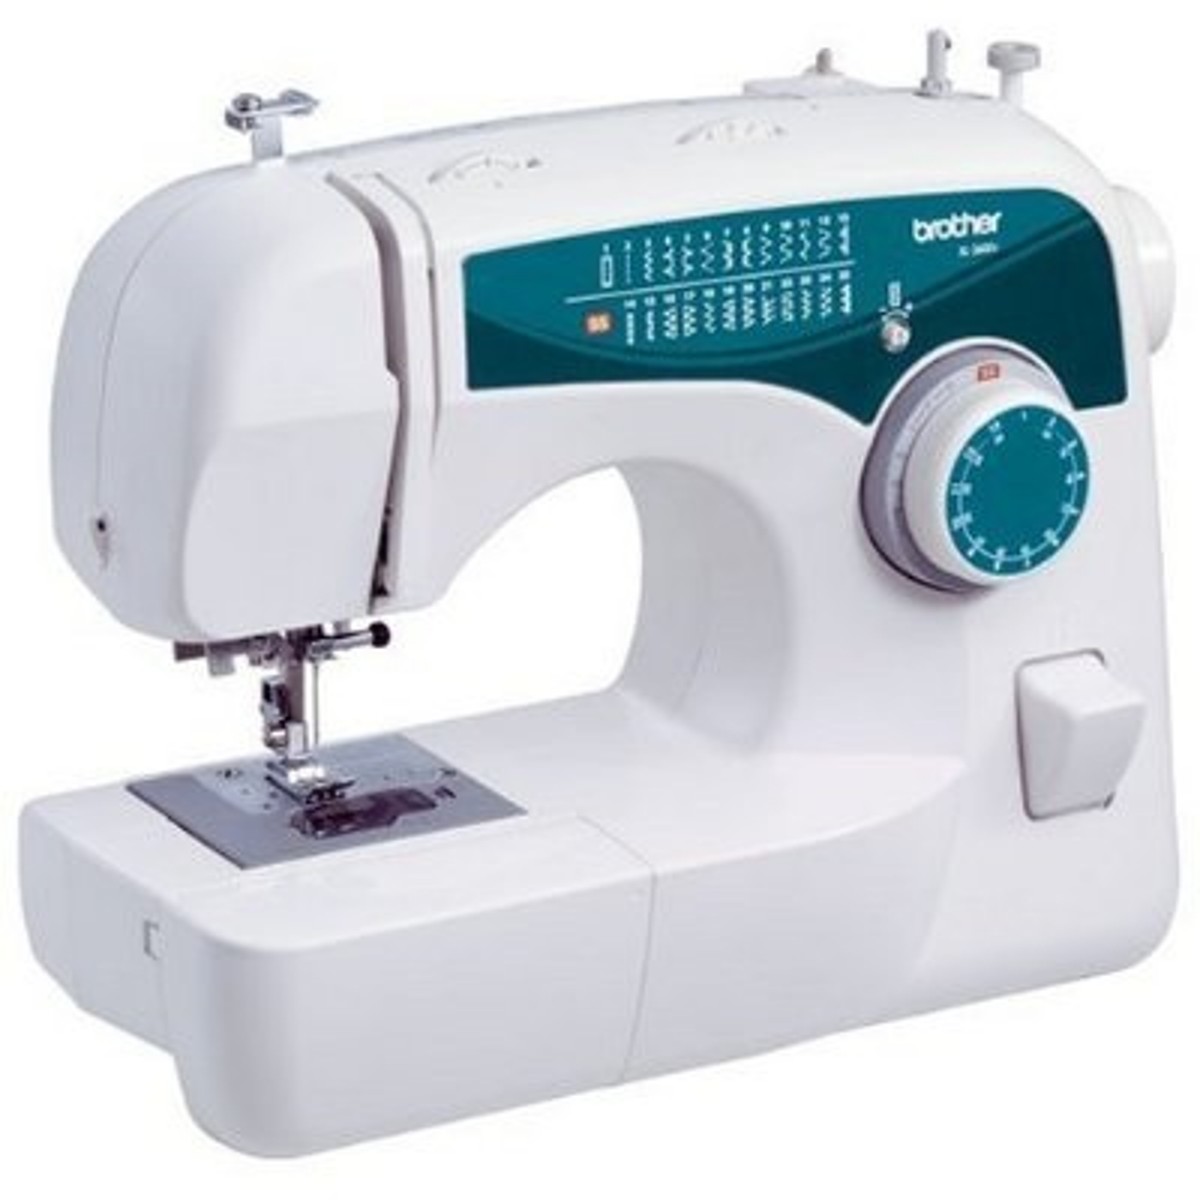 Brother XL2600i Sewing Machine Review